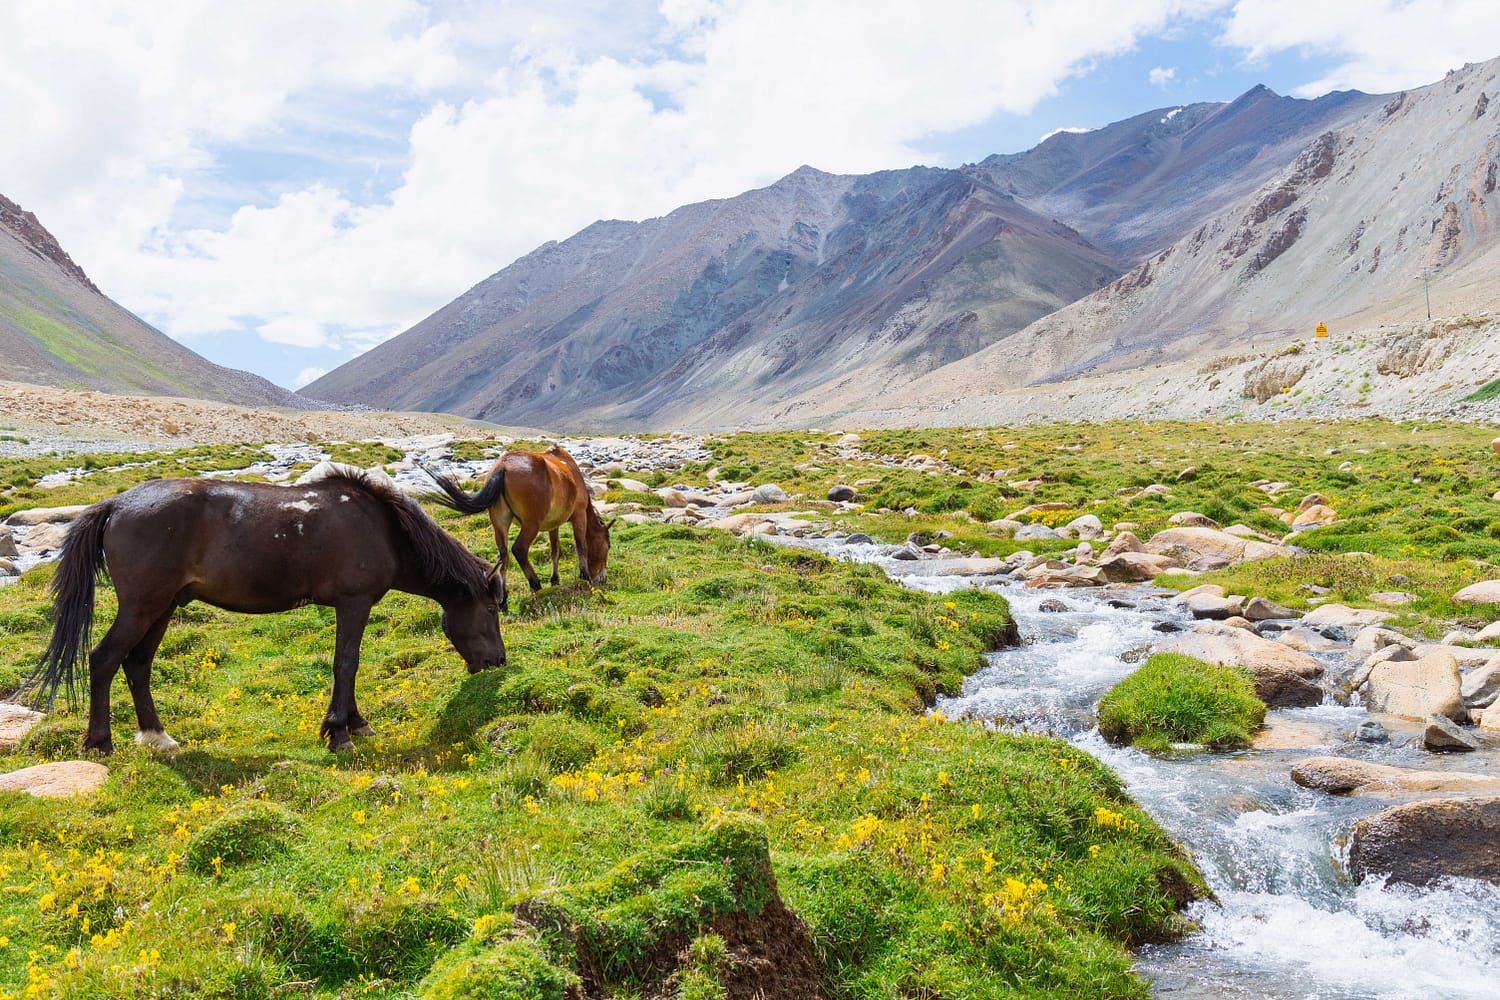 Horse riding tours in mountains, river